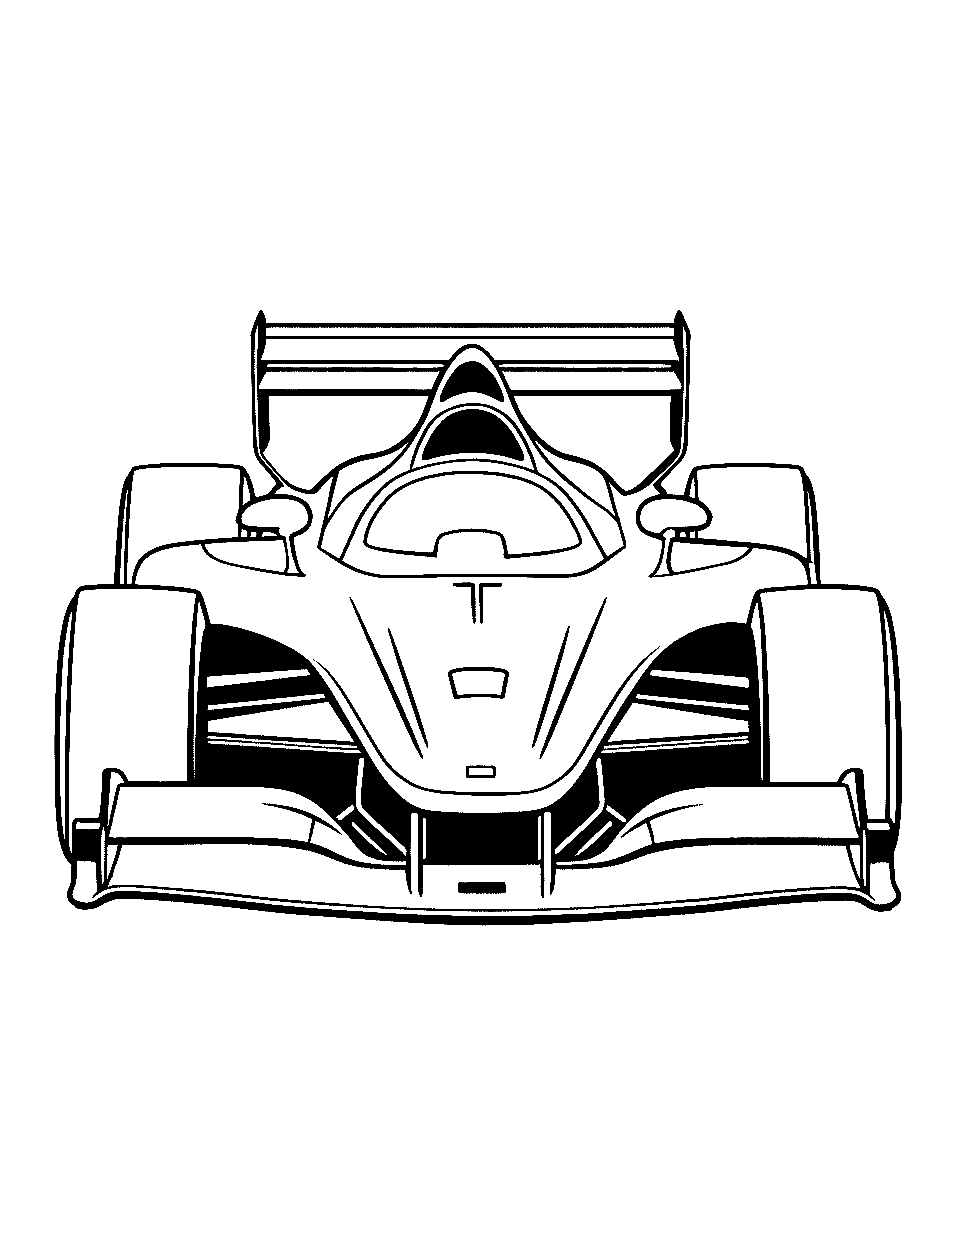 Realistic Race Car Coloring Page - A detailed drawing of a race car with realistic features.